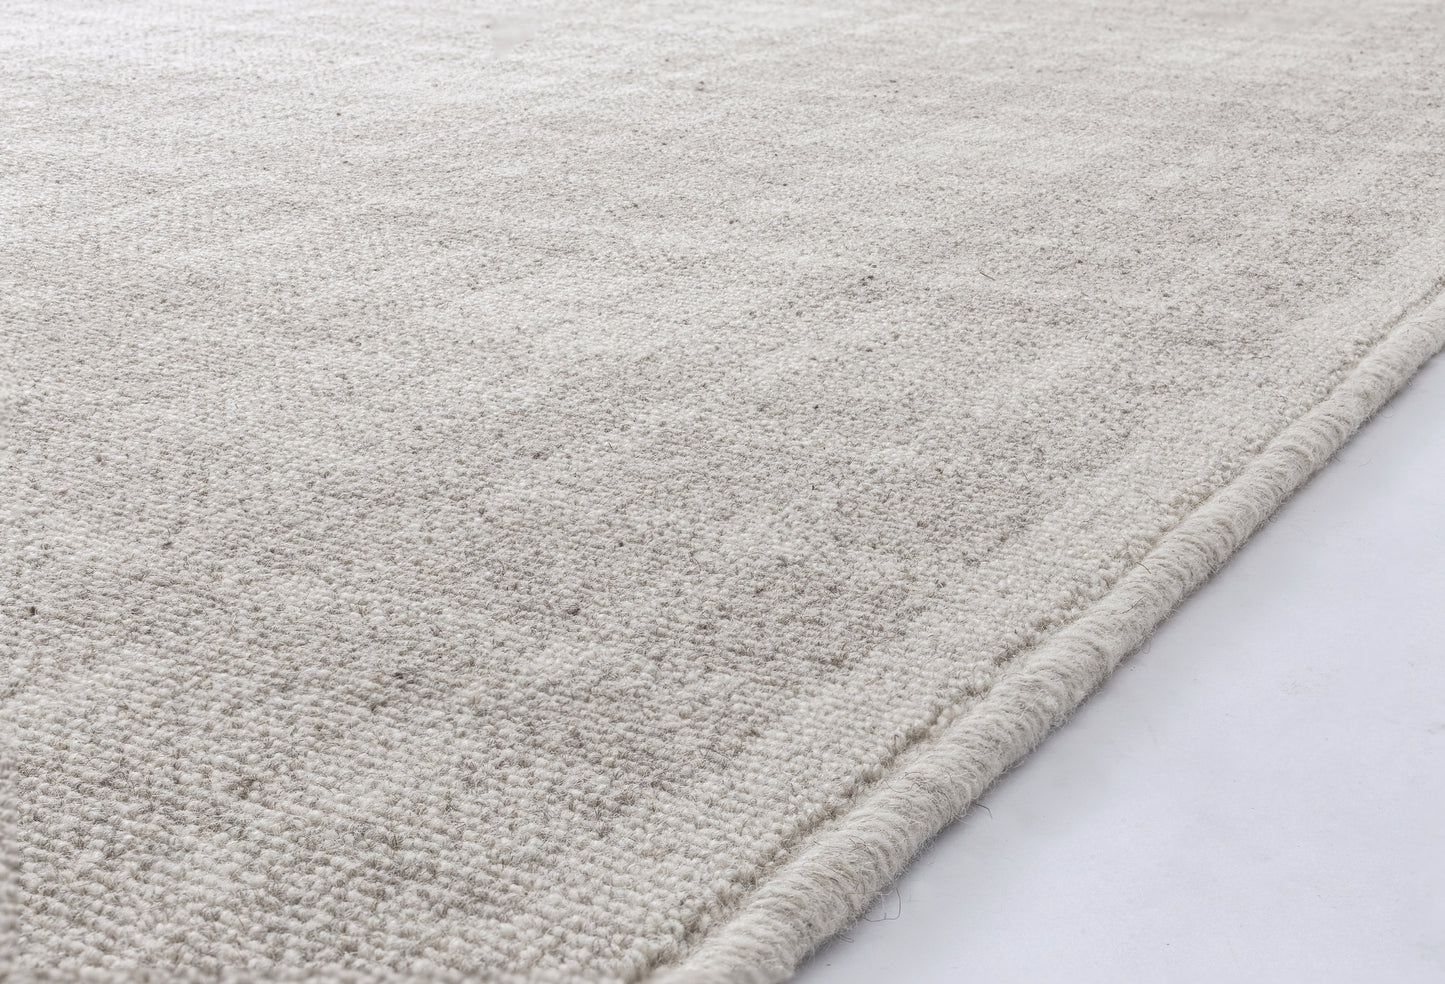 Agnella Rugs Noble PANO Light Grey - 100% Undyed British Wool - Free Delivery